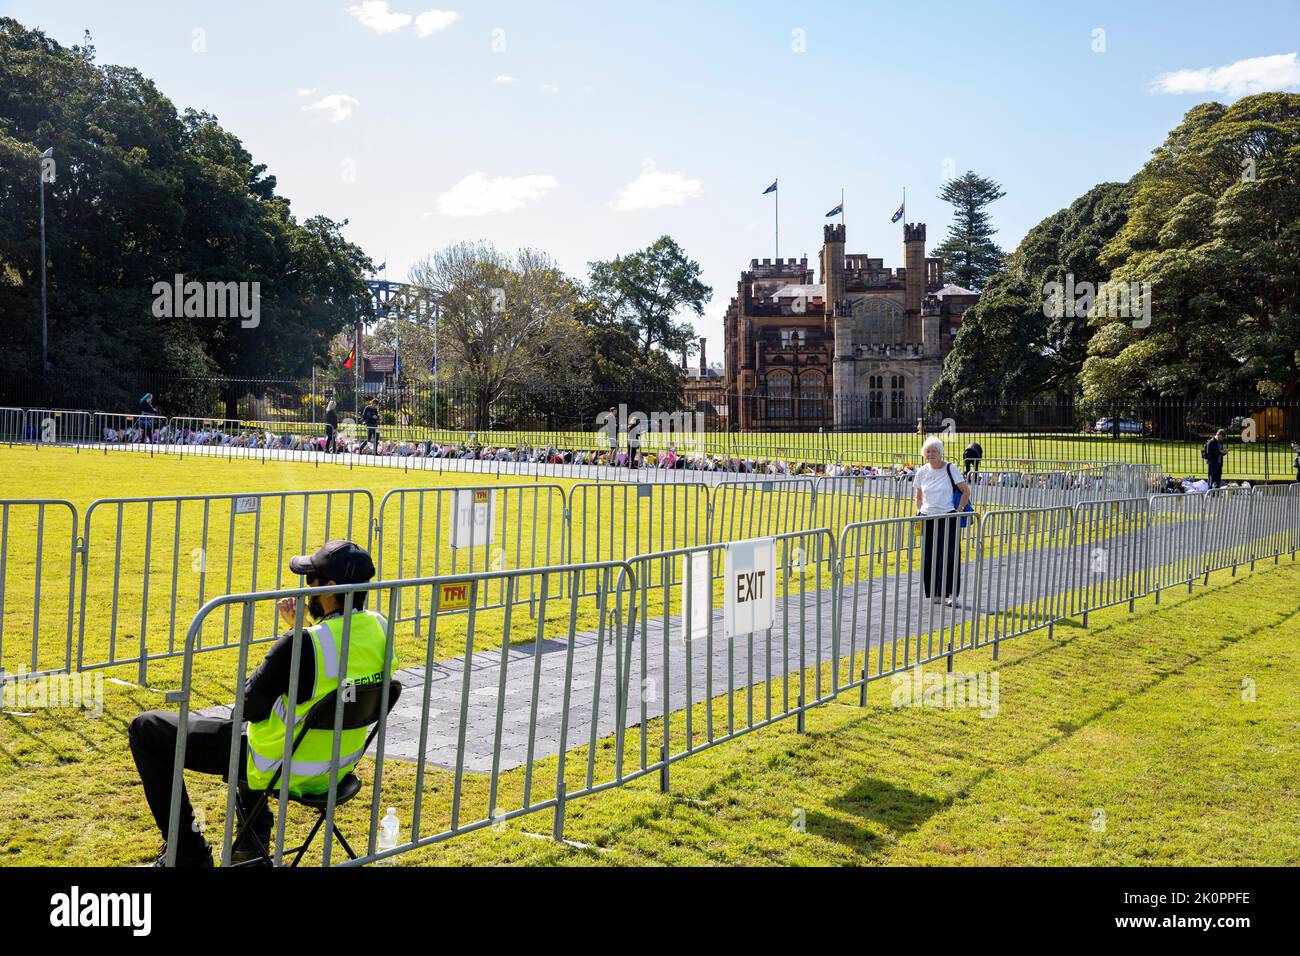 Death of Queen Elizabeth II, route for mourners to leave flowers and pay respects at Government House in Sydney city centre,NSW,Australia Stock Photo